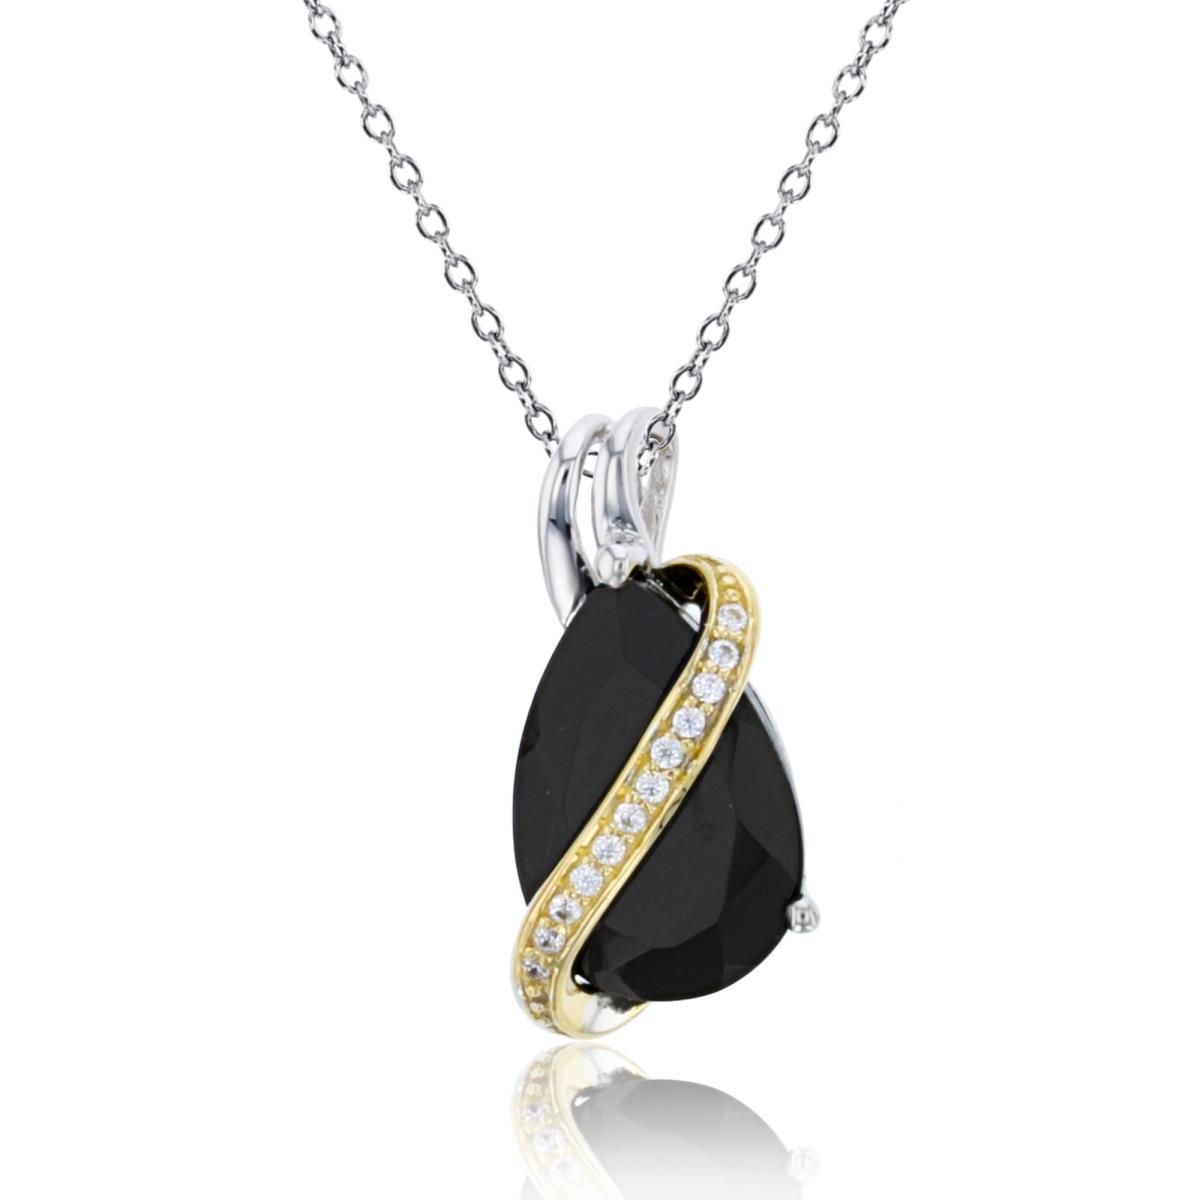 14K Yellow Gold & Sterling Silver 0.05 CTTW Rnd Diamond Row Over 12x8mm PS Onyx 18"Necklace